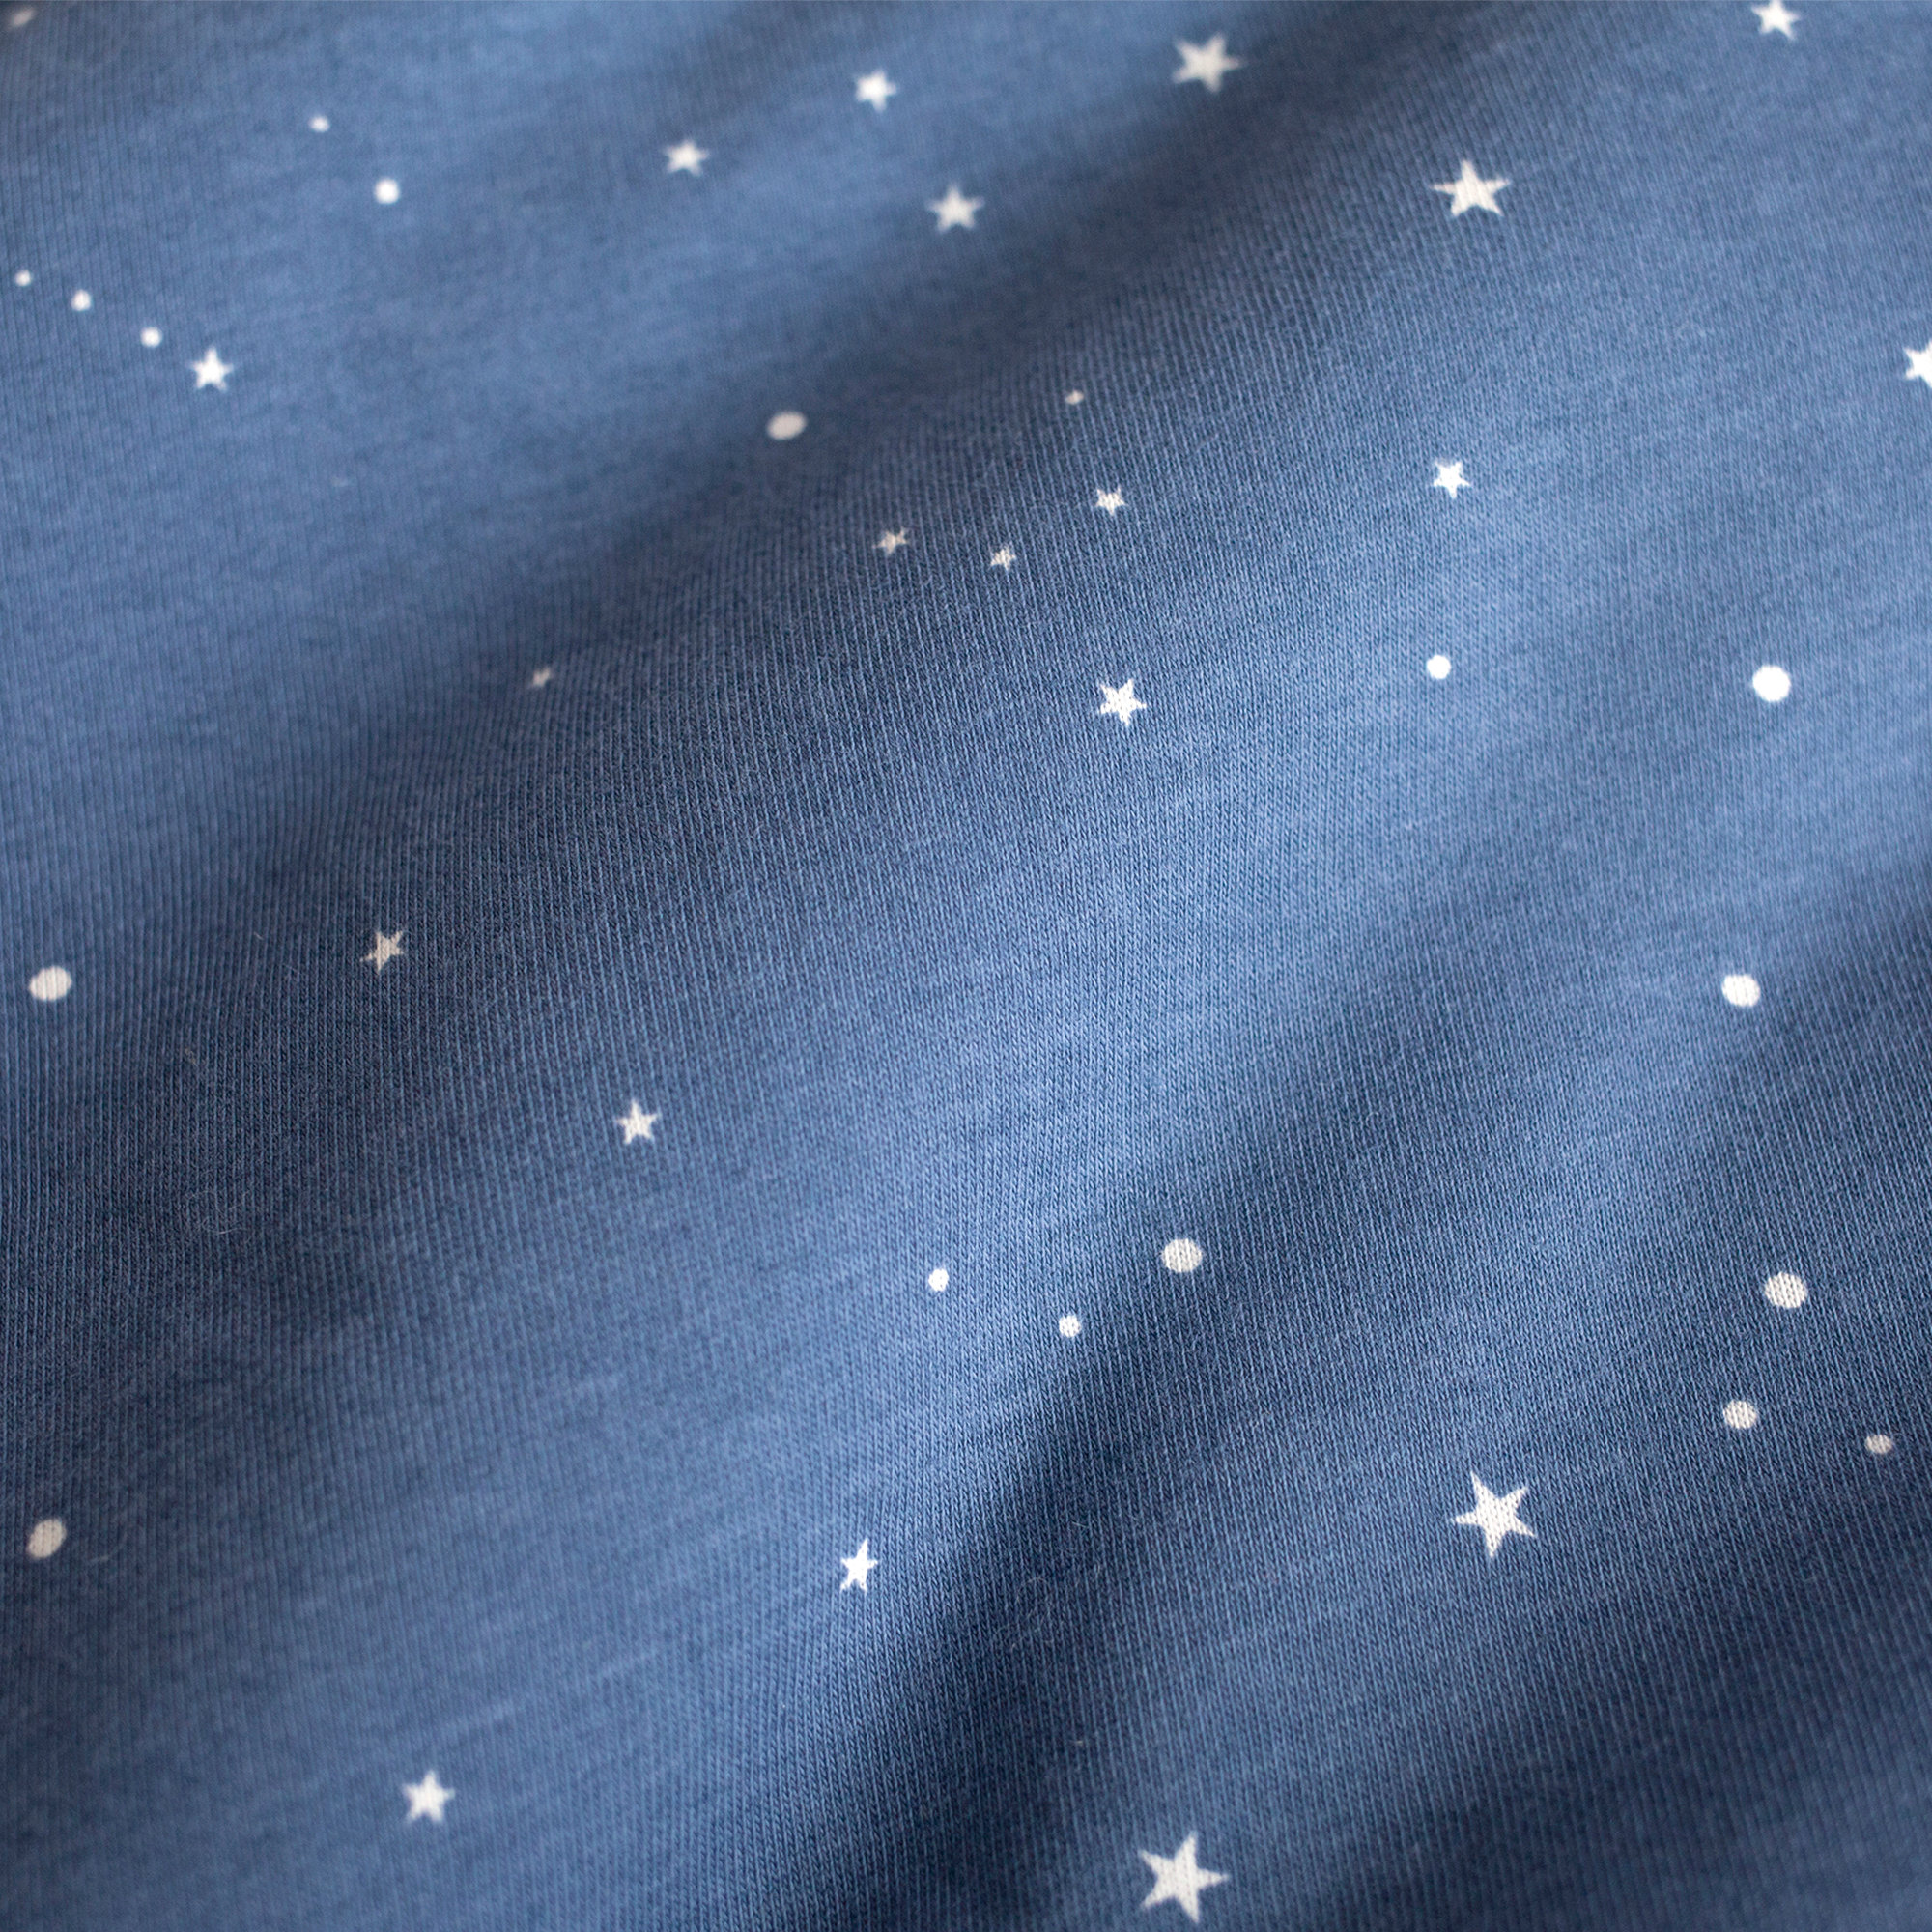 Protector de parque Pady jersey + jersey 100x100x28cm STARY Little stars print shadeOutlet